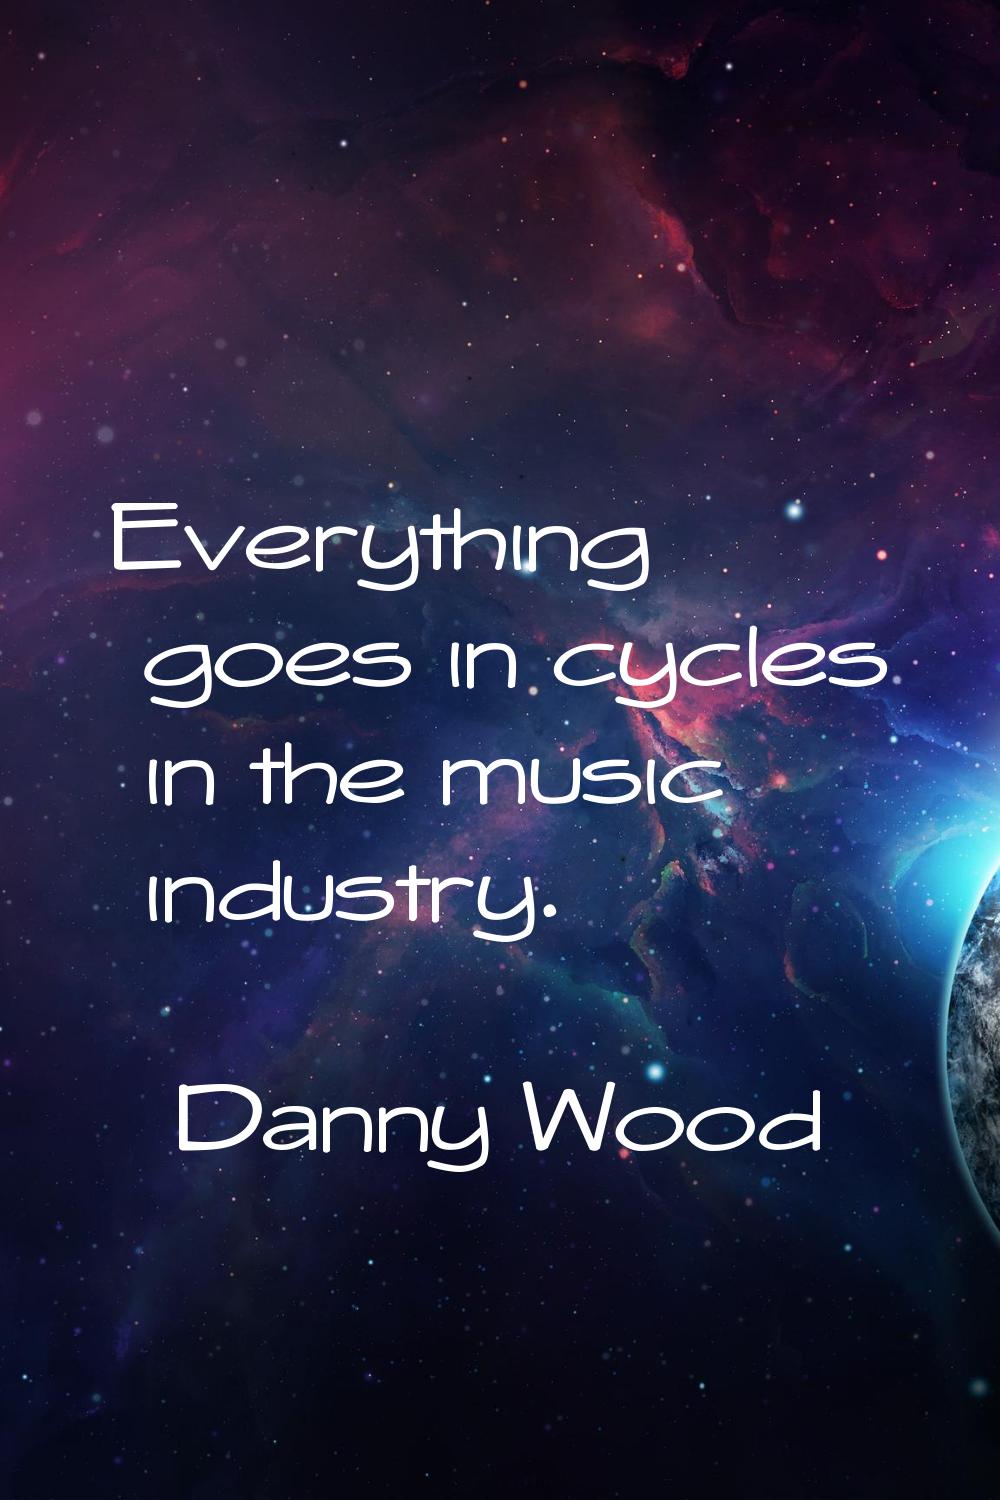 Everything goes in cycles in the music industry.